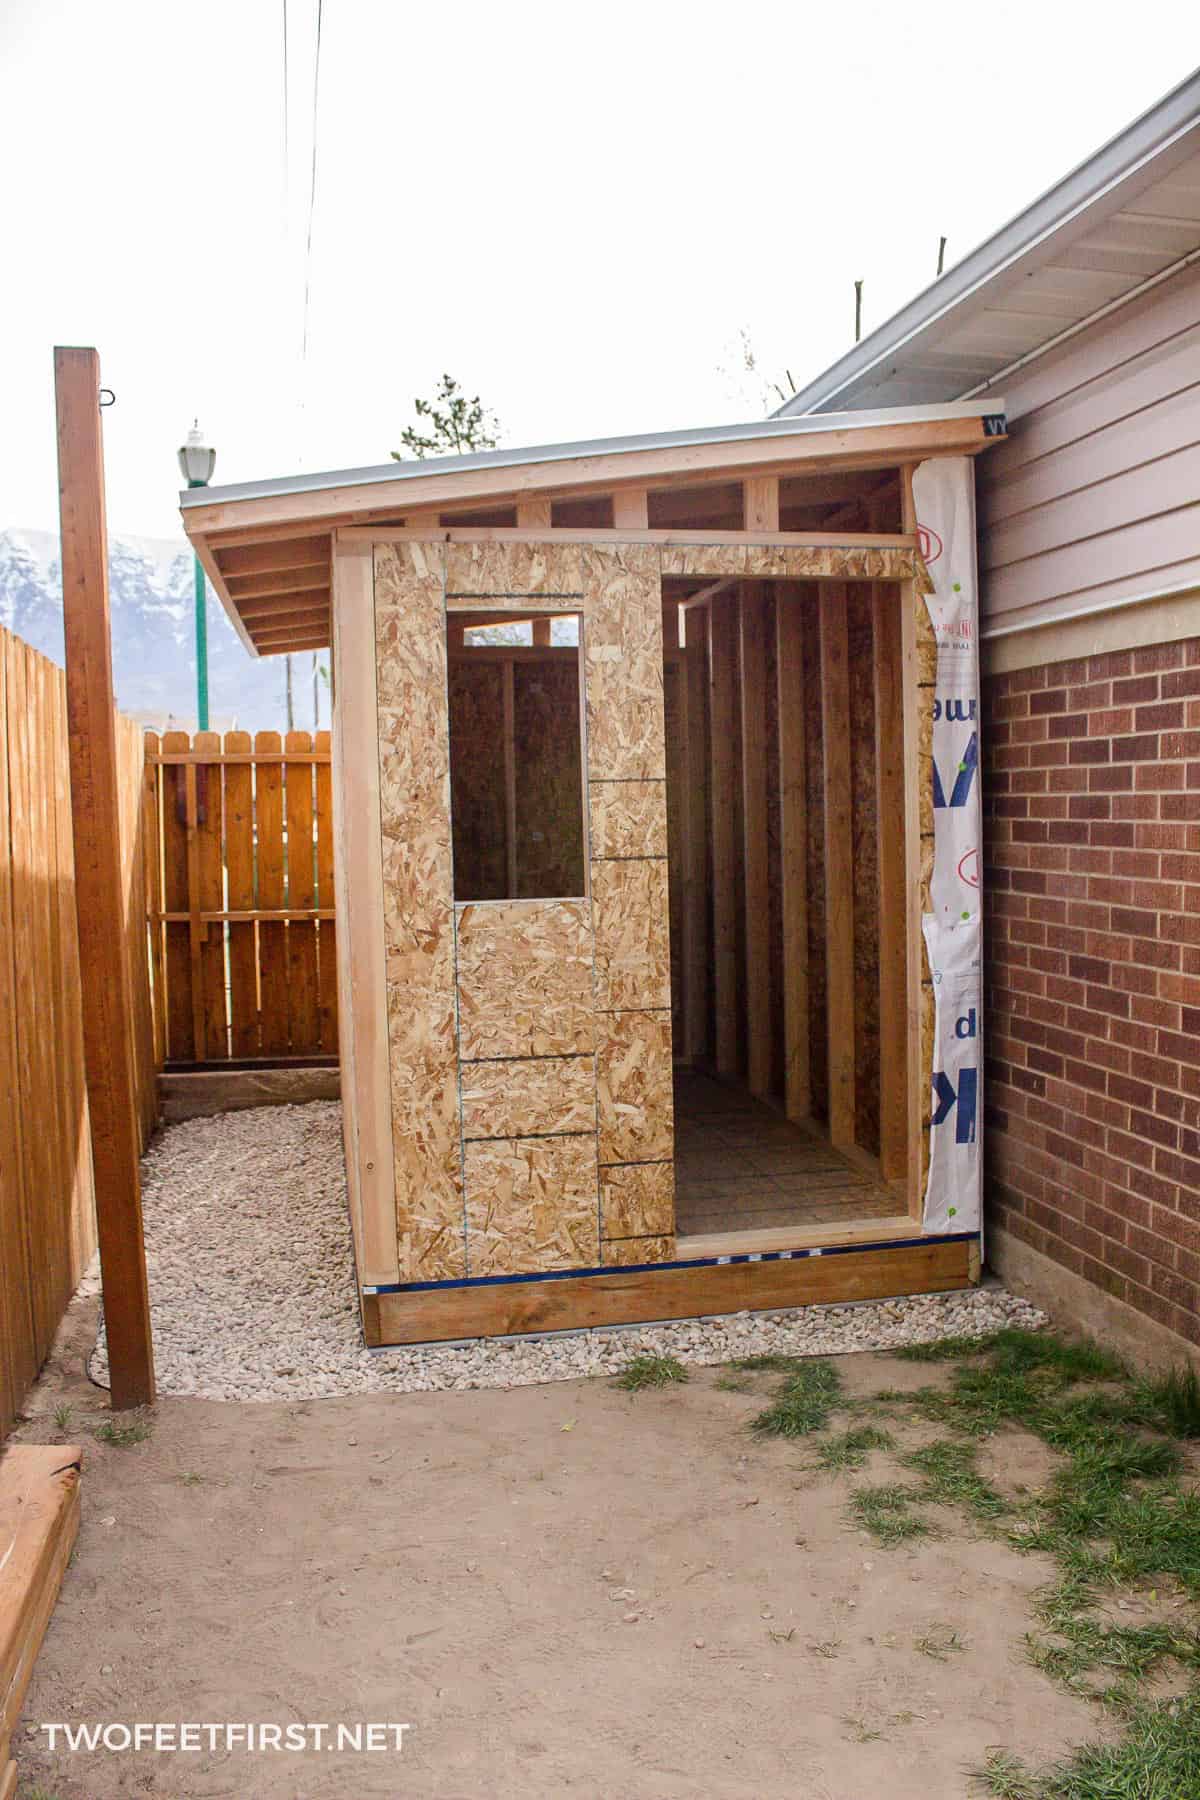 How to build a shed youâ€™ll love - A DIY guide